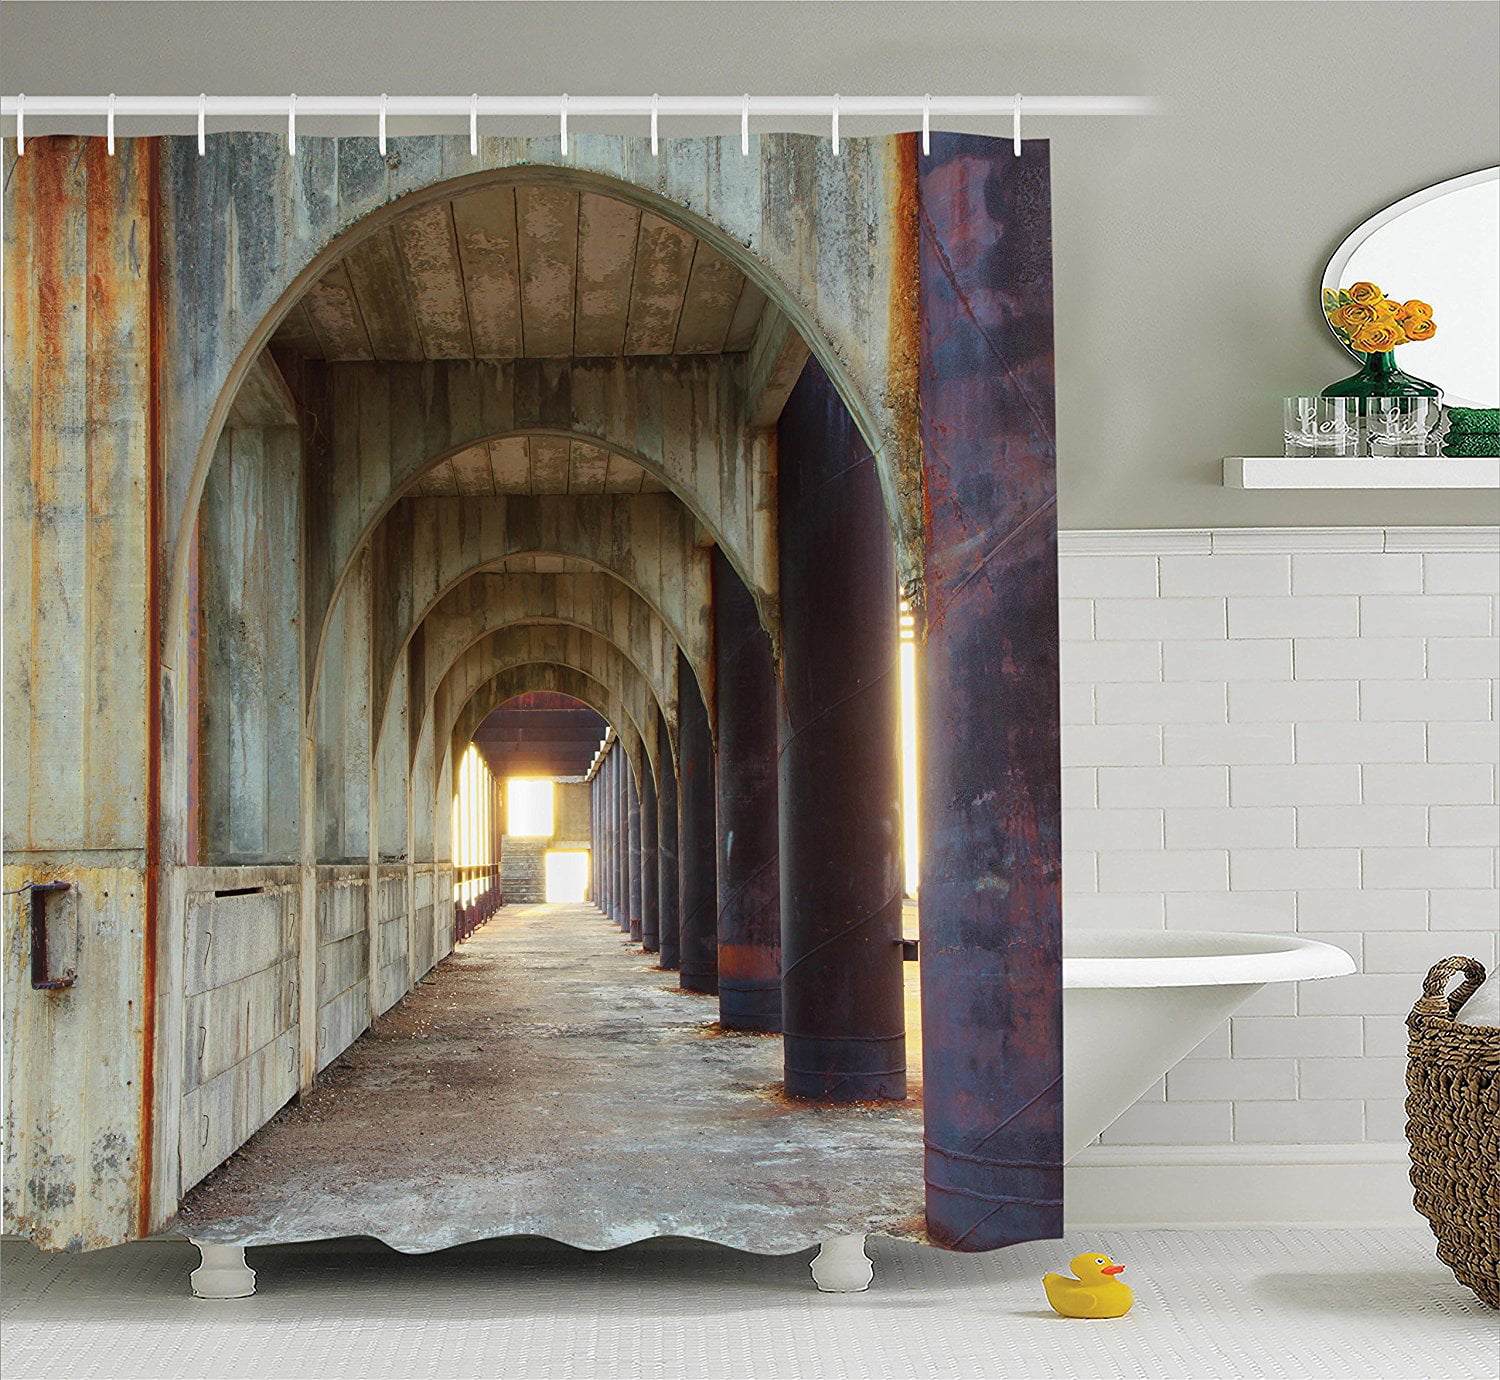 Details about   Rustic Shower Curtain Historic Old Store Front Print for Bathroom 